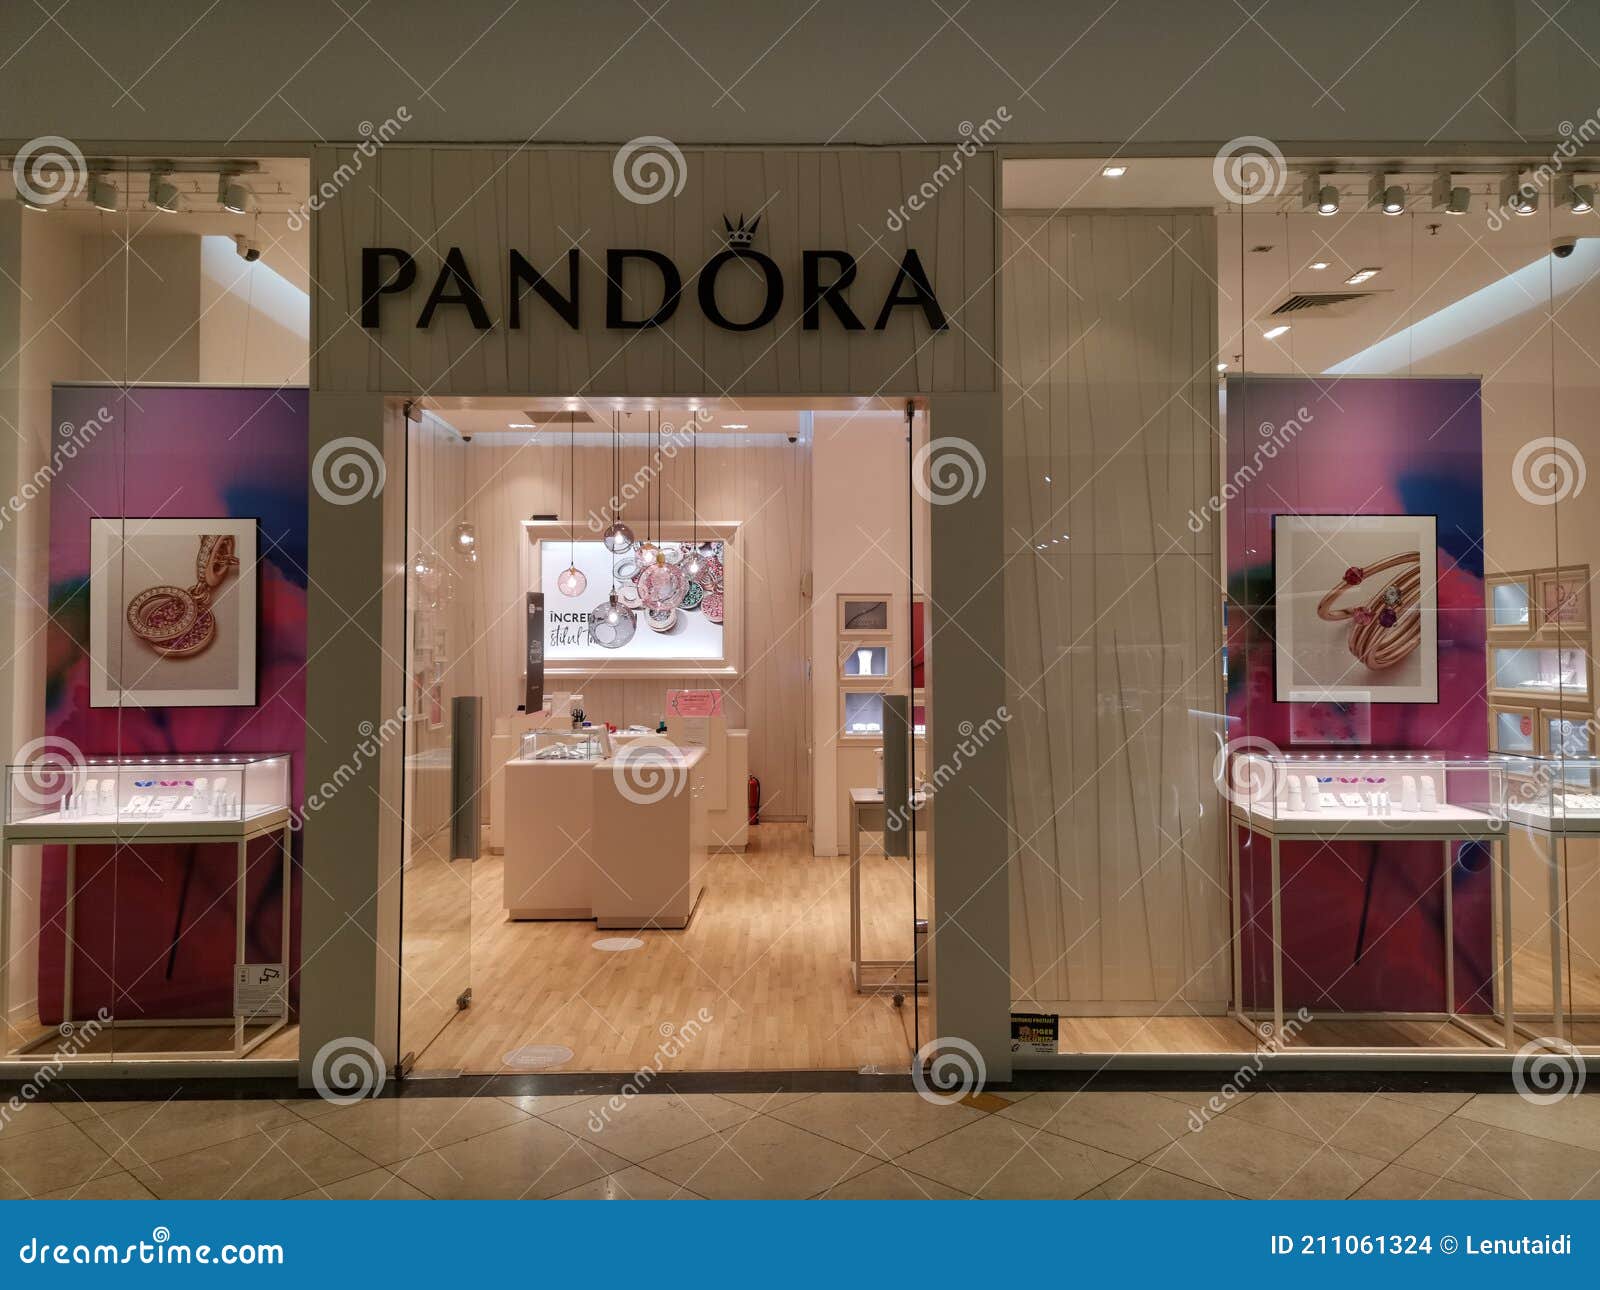 Pandora Jewelry is one of the best places to shop in Las Vegas